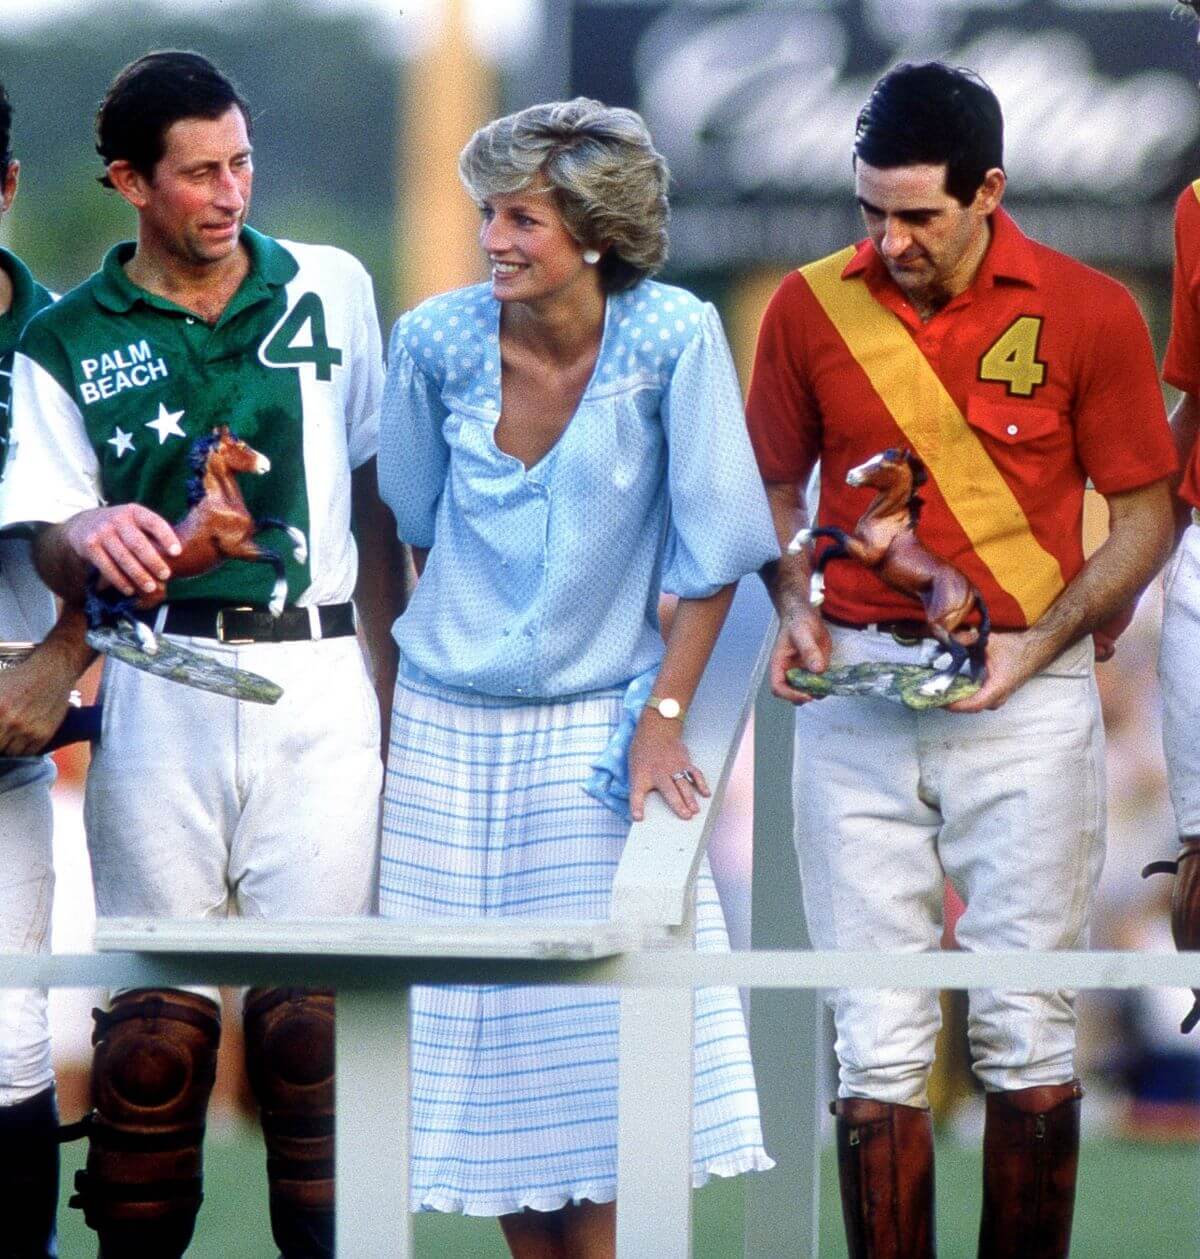 Princess Diana and then-Prince Charles at a polo match in Palm Beach, Florida (circa 1985)